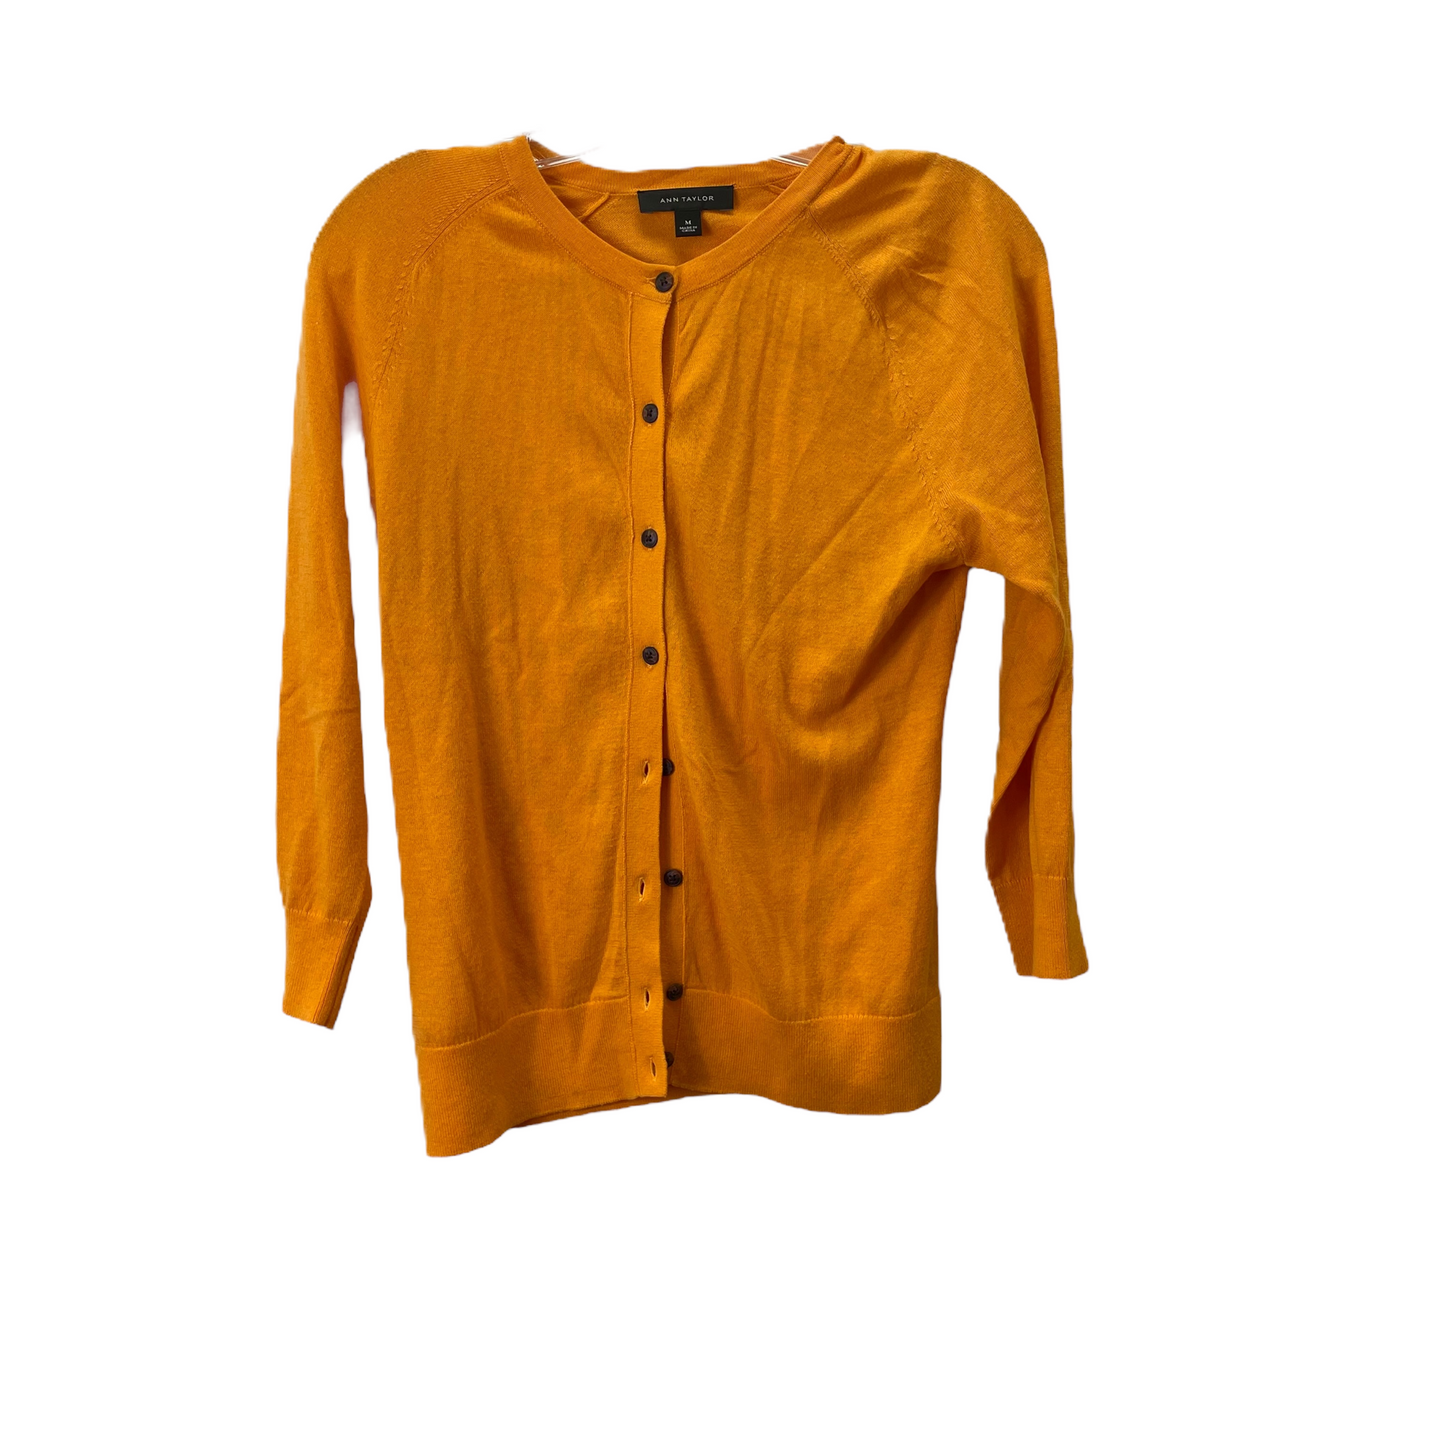 Yellow Sweater By Ann Taylor, Size: M